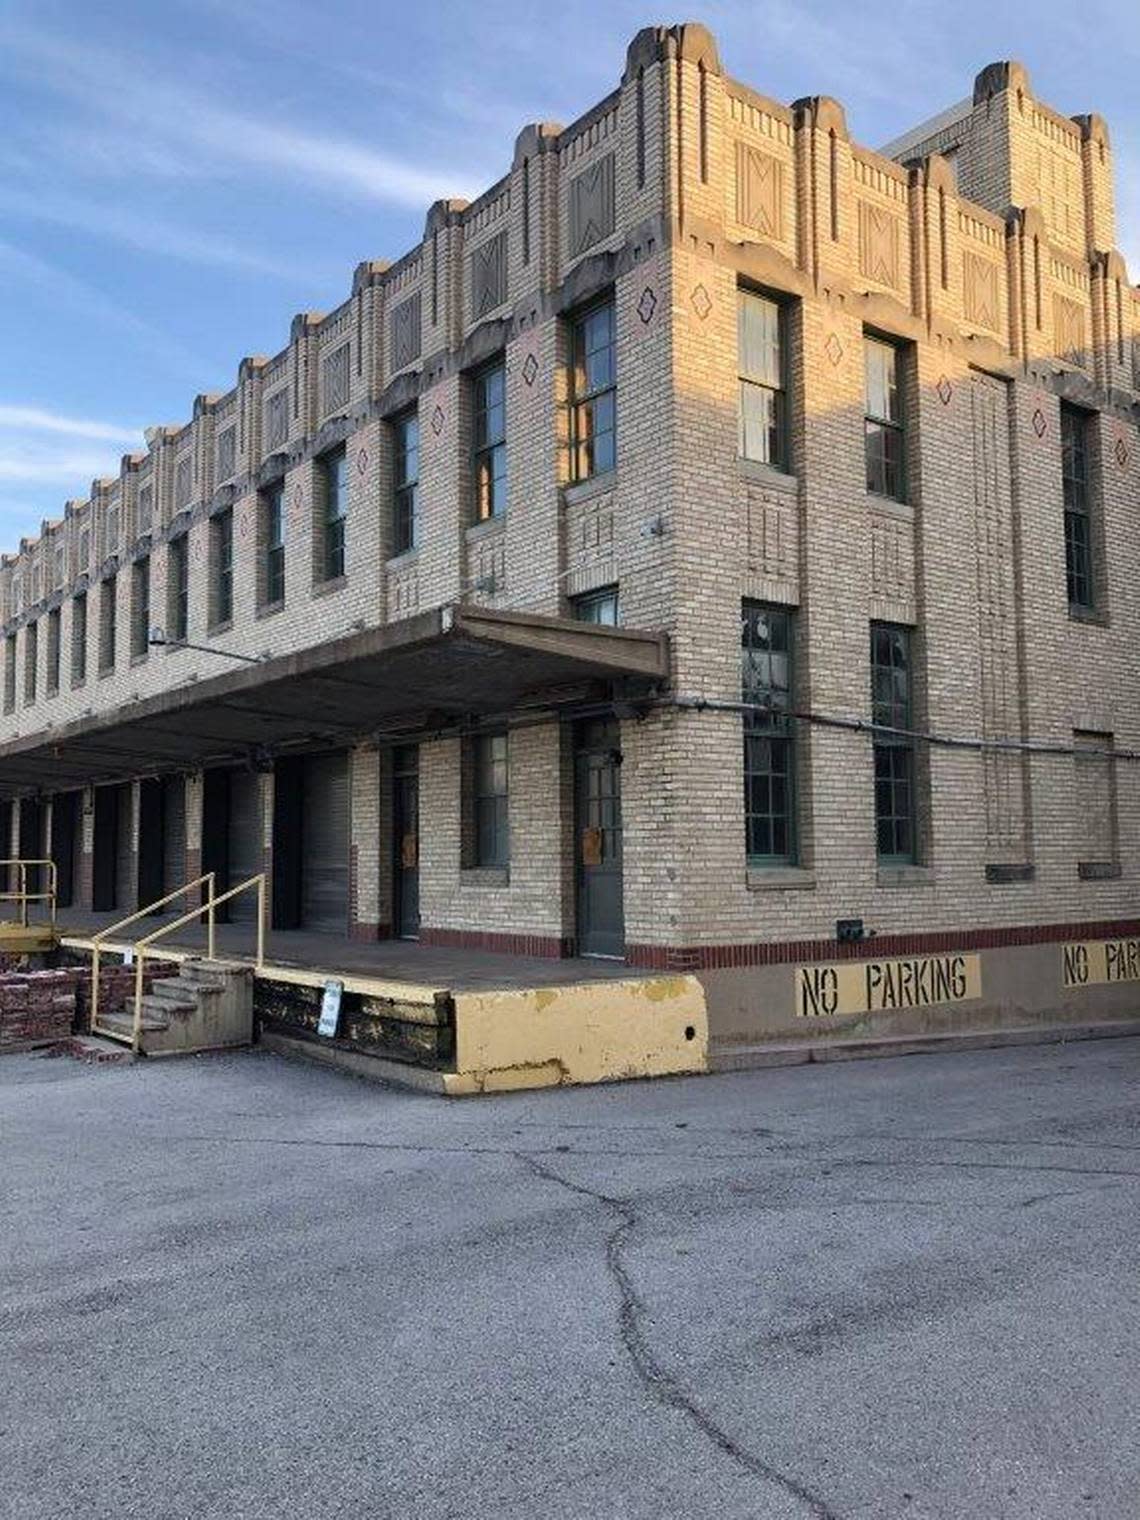 The Railway Express building remains empty on Lancaster Street in Fort Worth, 50 years after the business went bankrupt. It is a sister building to the T&P warehouse, which is also empty. Courtesy/Richard Selcer